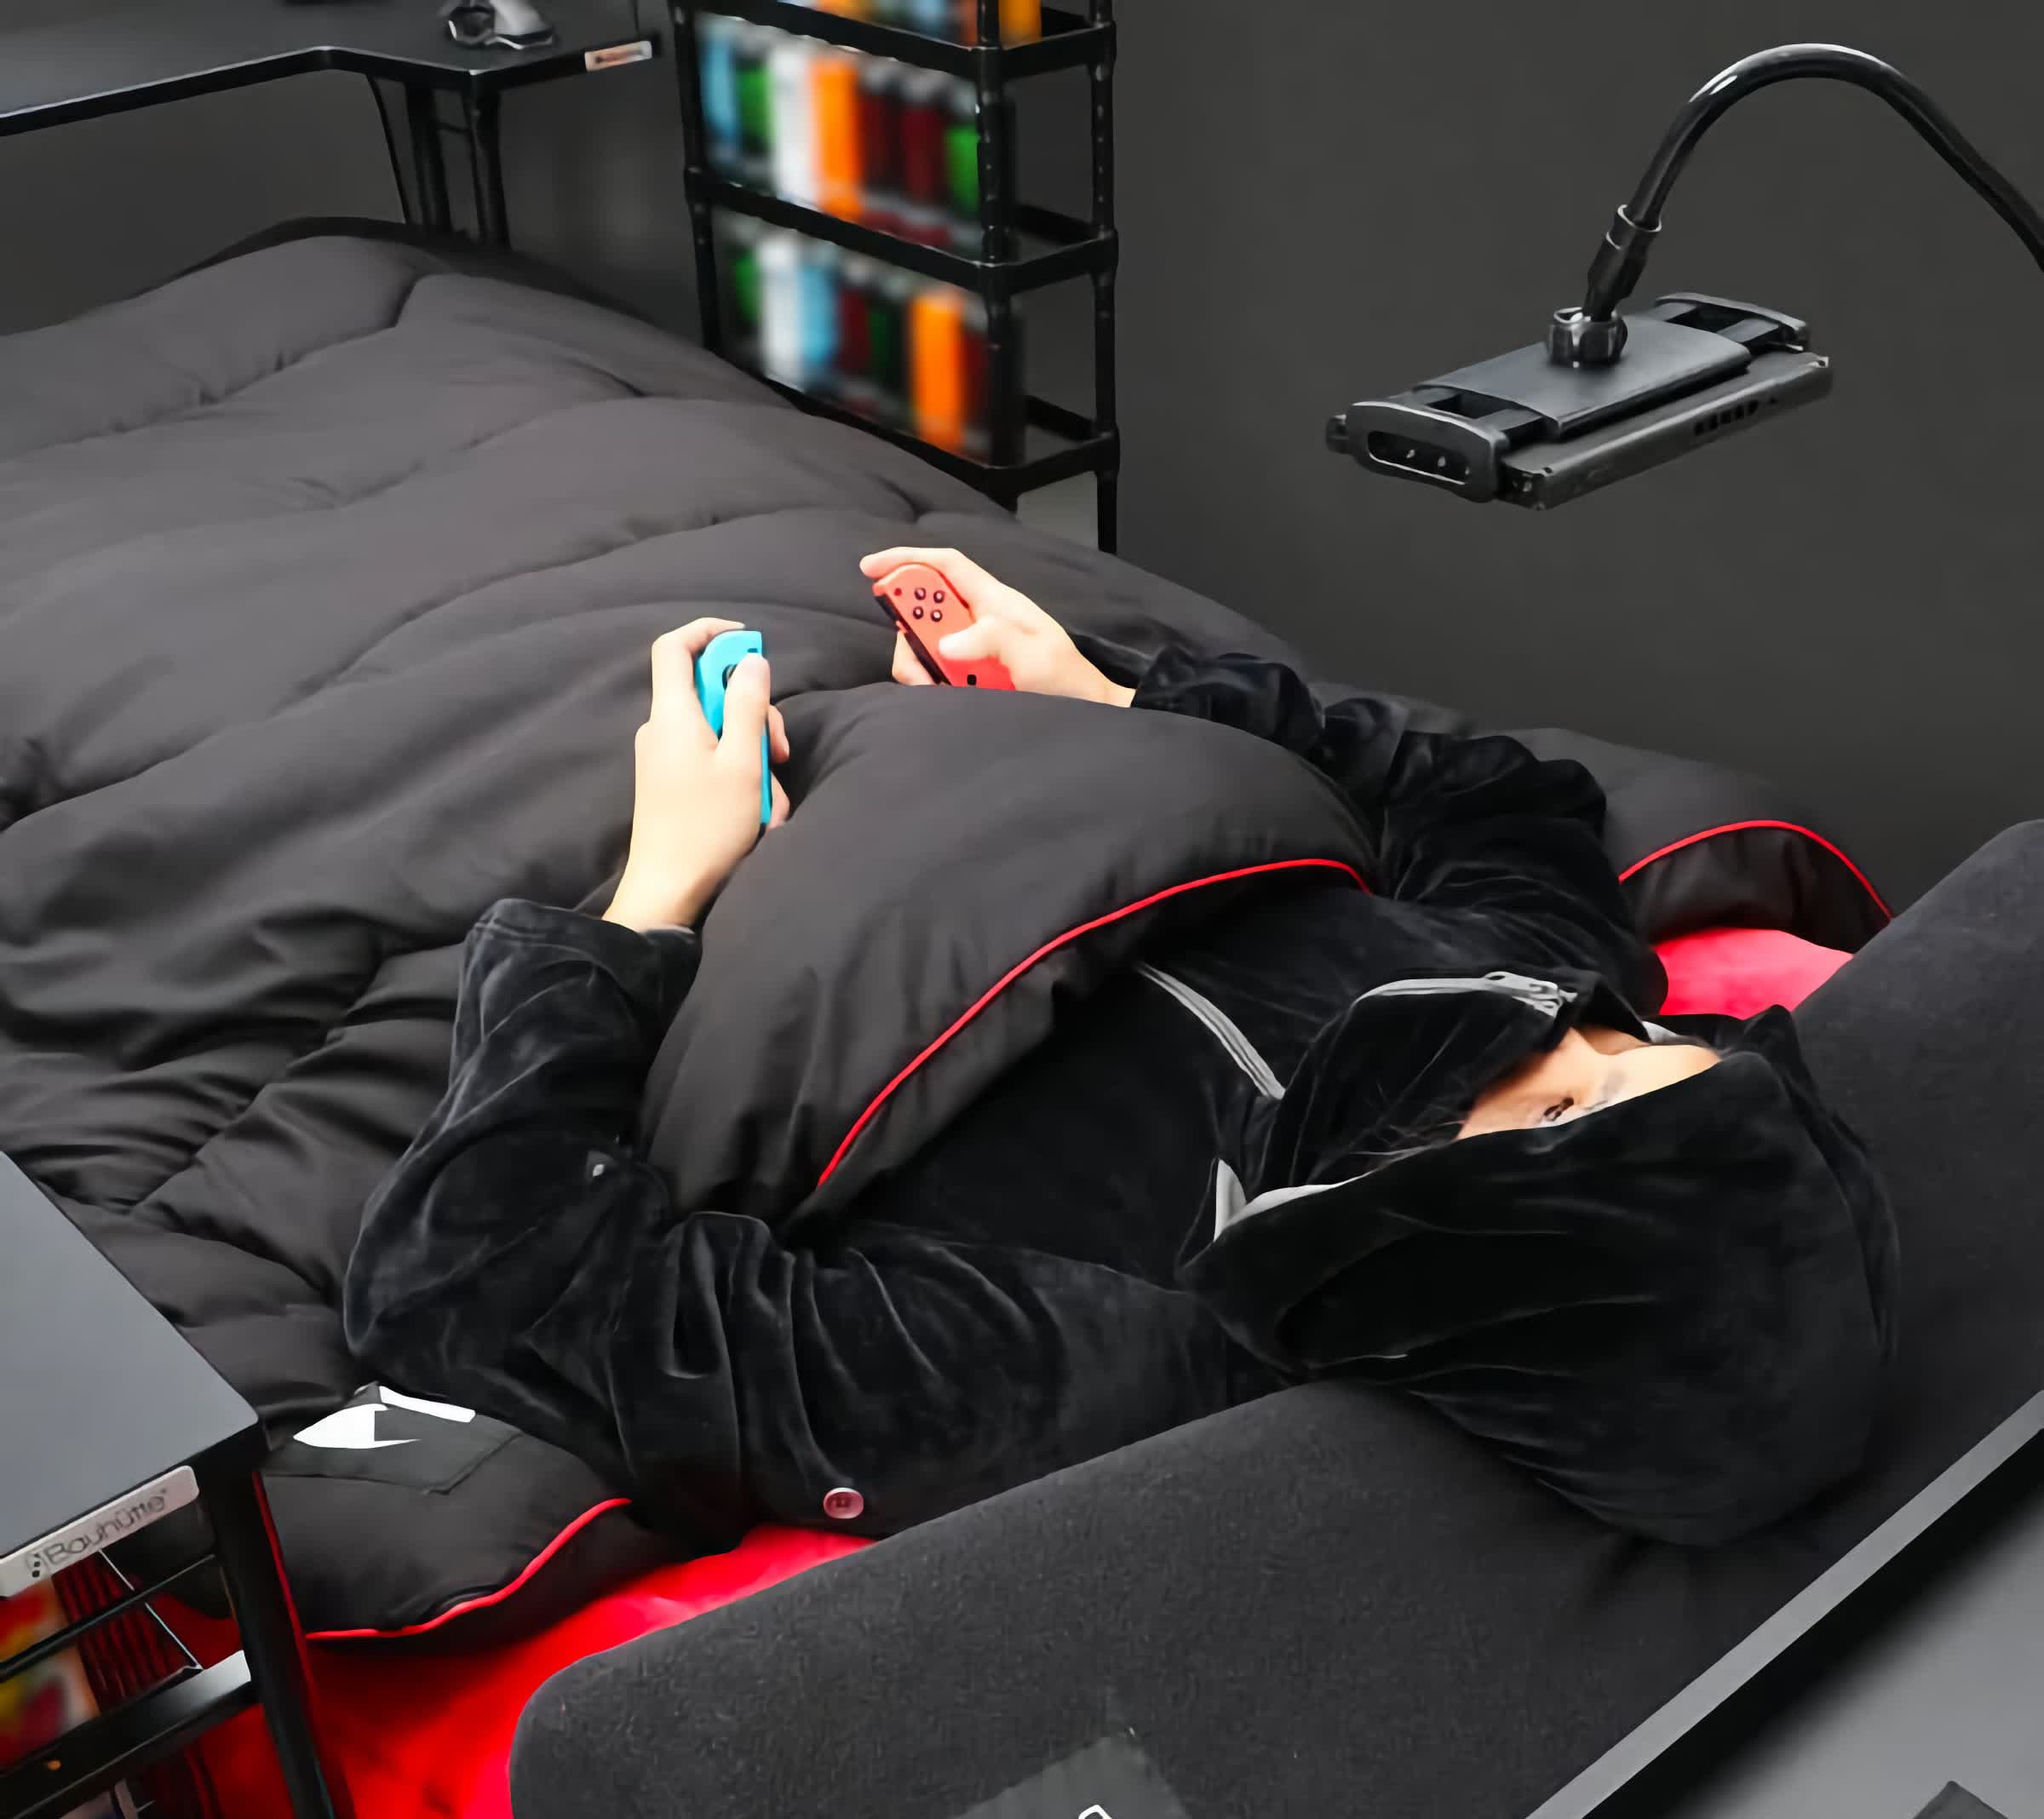 Game while sleeping: Check out this motorized bed made for dedicated gamers  | TechSpot